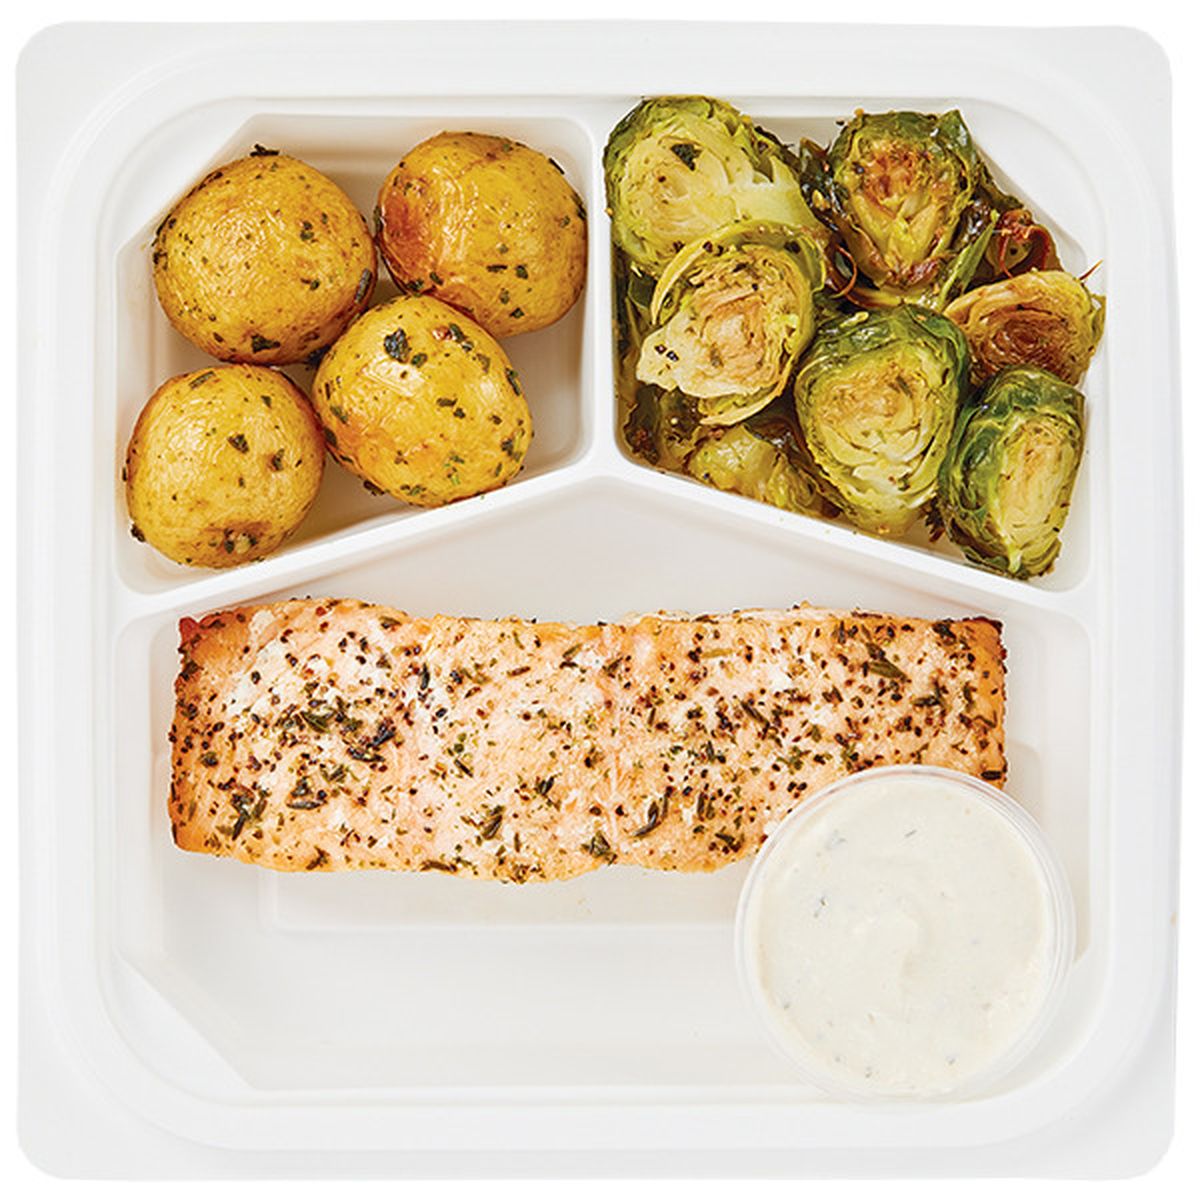 Calories in Wegmans Oven Roasted Salmon with Tuscan Roasted Potatoes & Roasted Brussel Sprouts